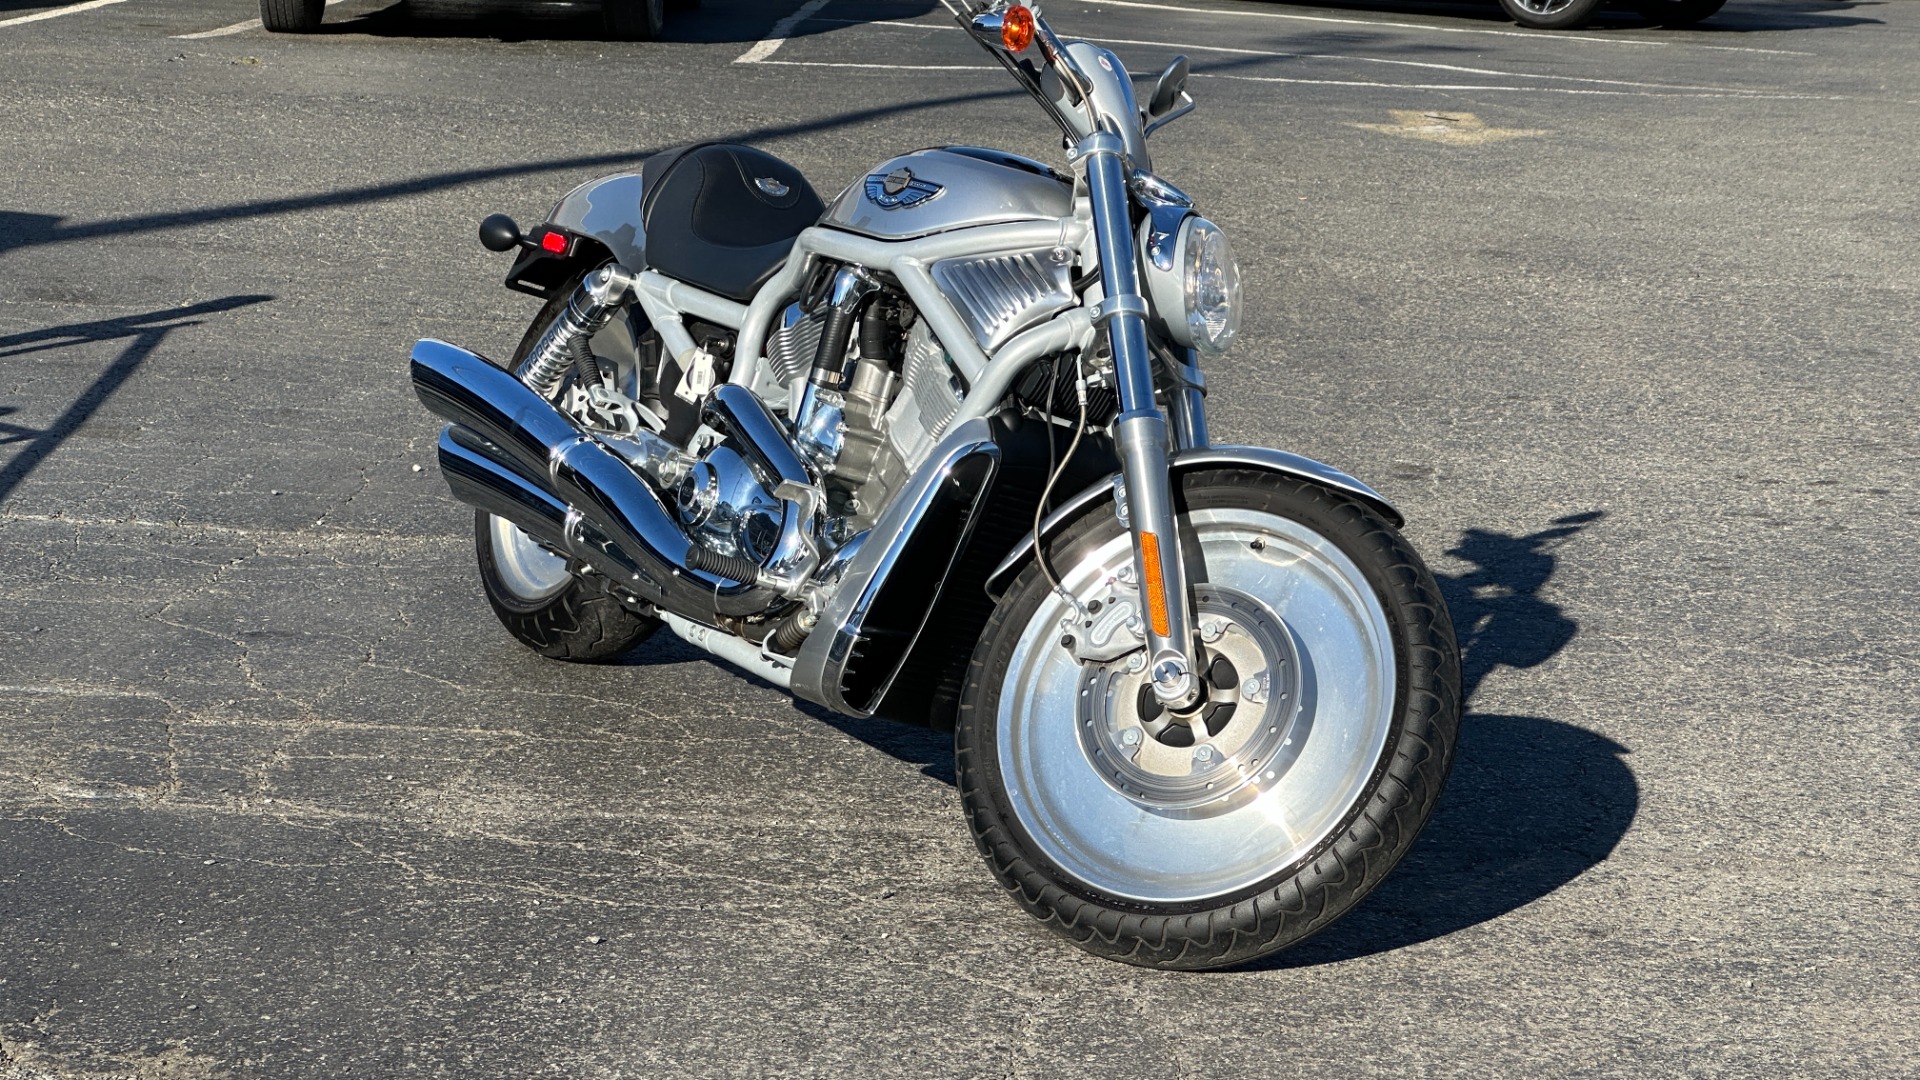 Used 2003 Harley Davidson V Rod ANNIVERSARY EDITION / 1130CC ENGINE / BREMBO BRAKES / VORTEX AIR SCOOPS for sale $7,695 at Formula Imports in Charlotte NC 28227 59